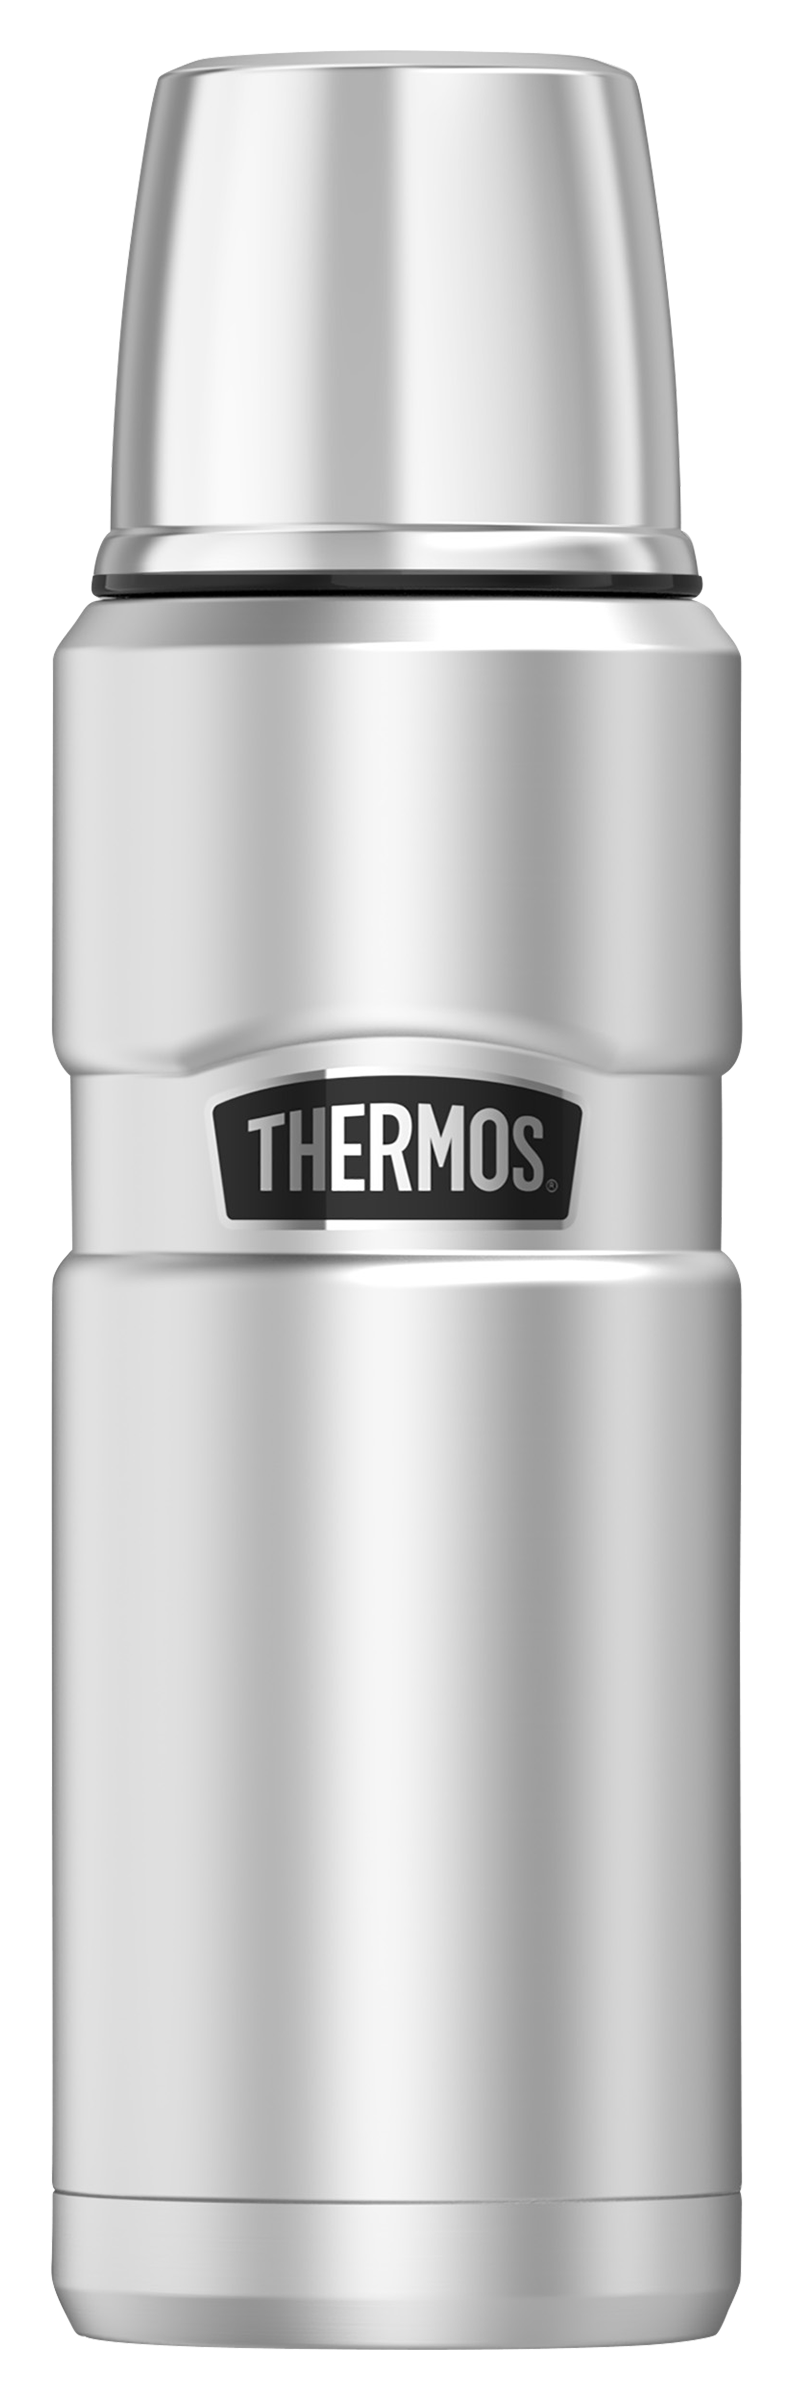 Thermos/Nissan Stainless King Insulated Beverage Bottle